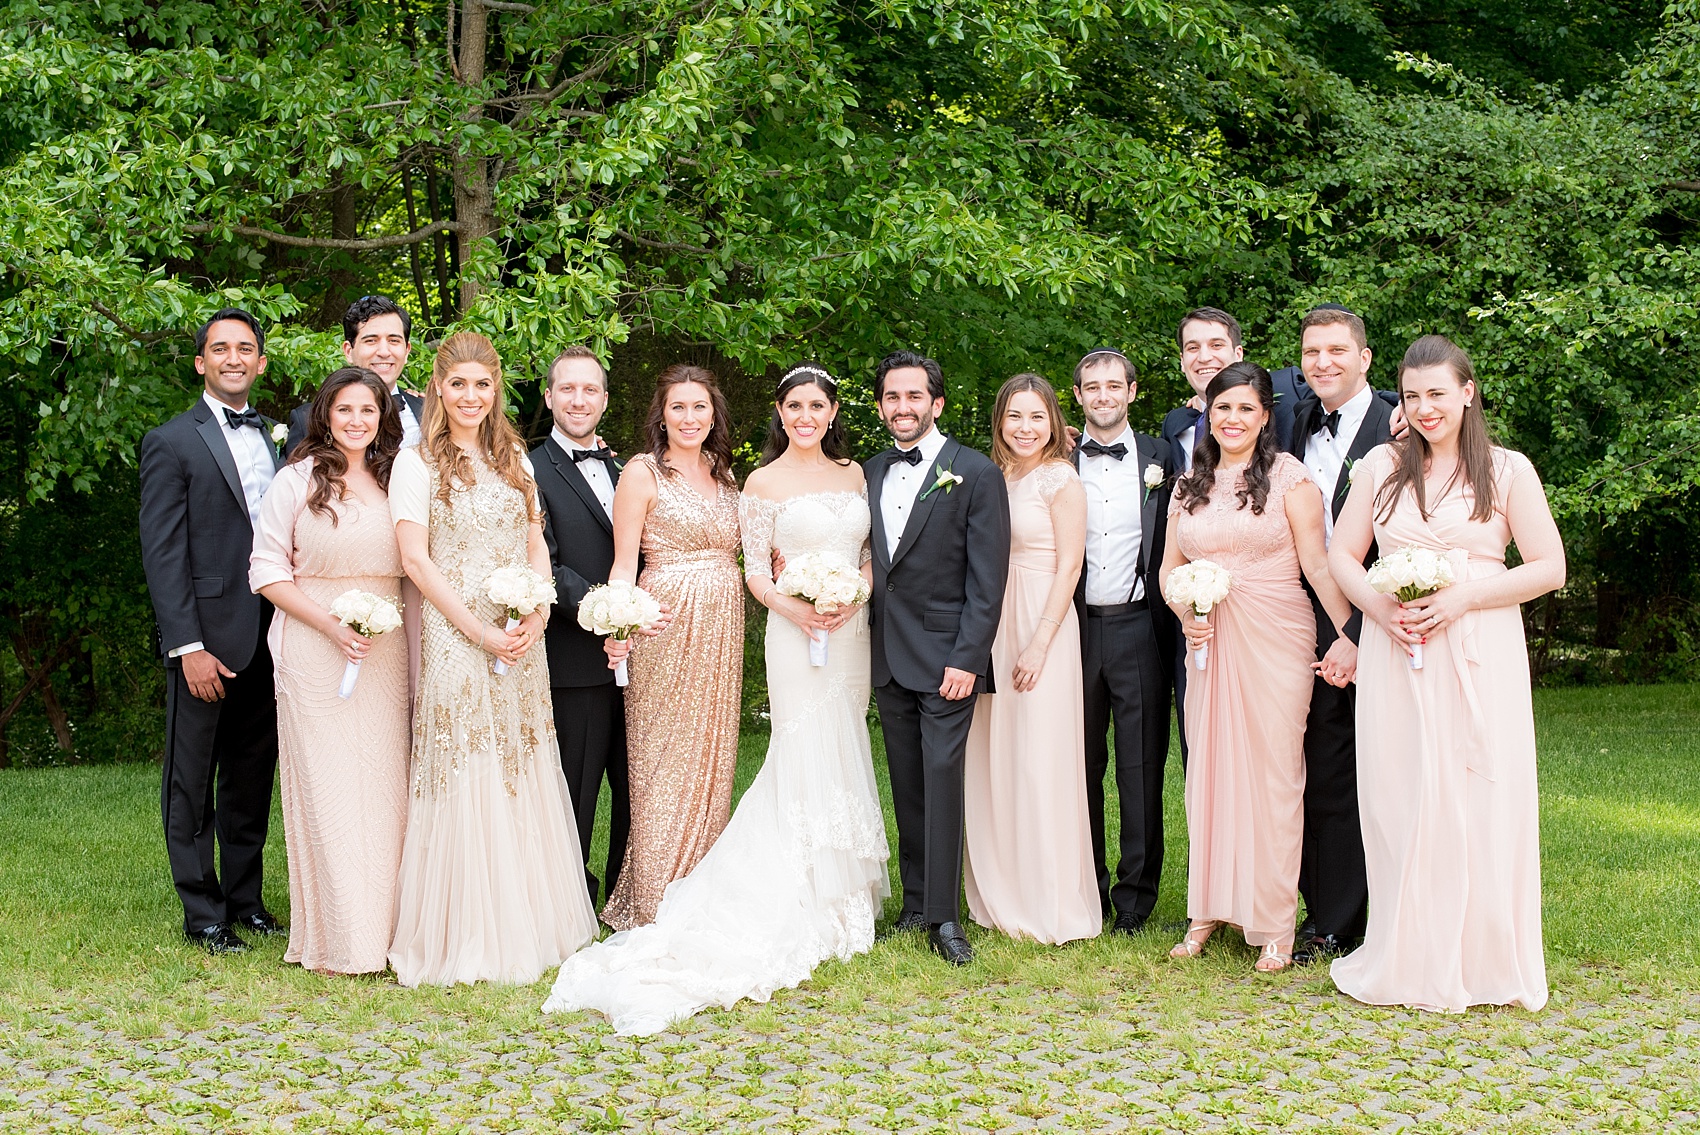 Mikkel Paige Photography photo of a wedding party with bridesmaids in light pink blush mismatched dresses of their choice. Orthodox Jewish wedding at Temple Emanu-El in Closter, NJ.